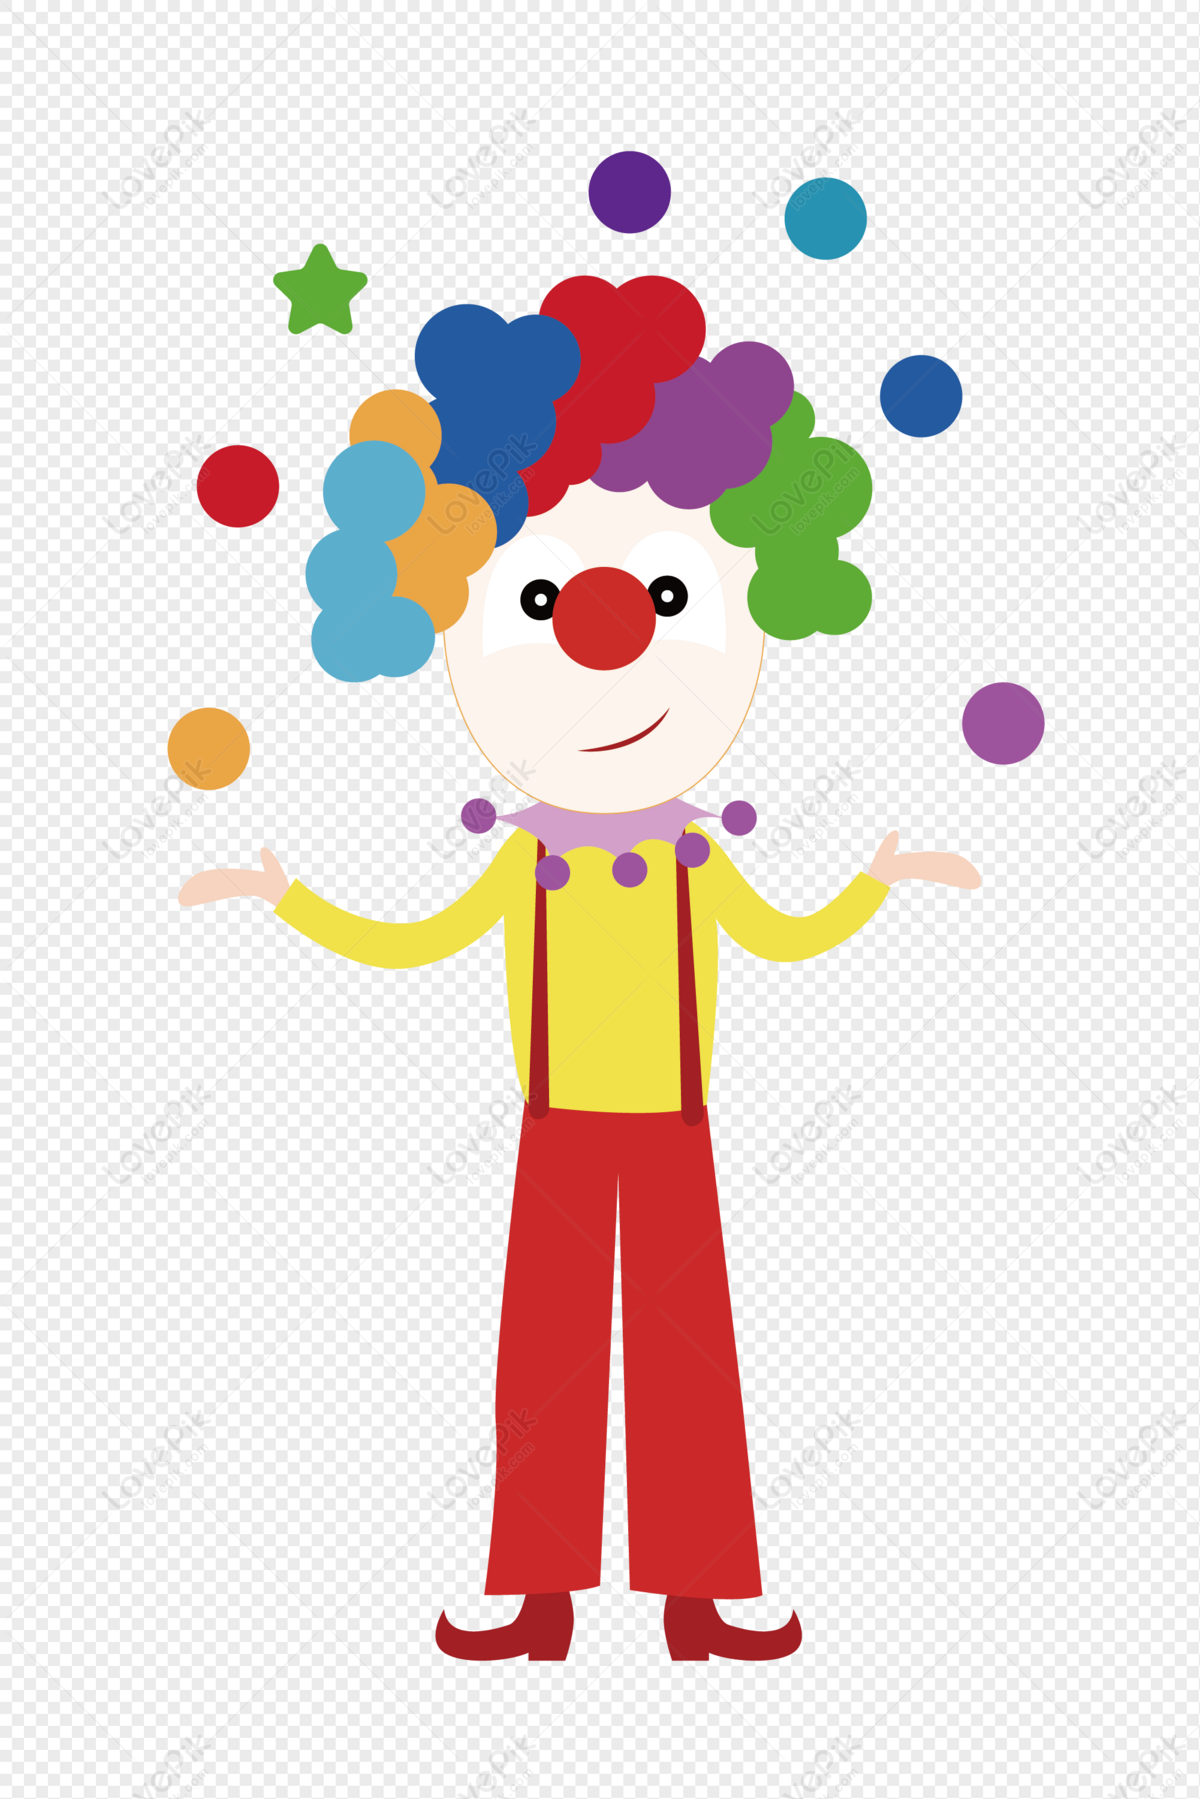 Cartoon Joker PNG Transparent Background And Clipart Image For Free  Download - Lovepik | 401054820